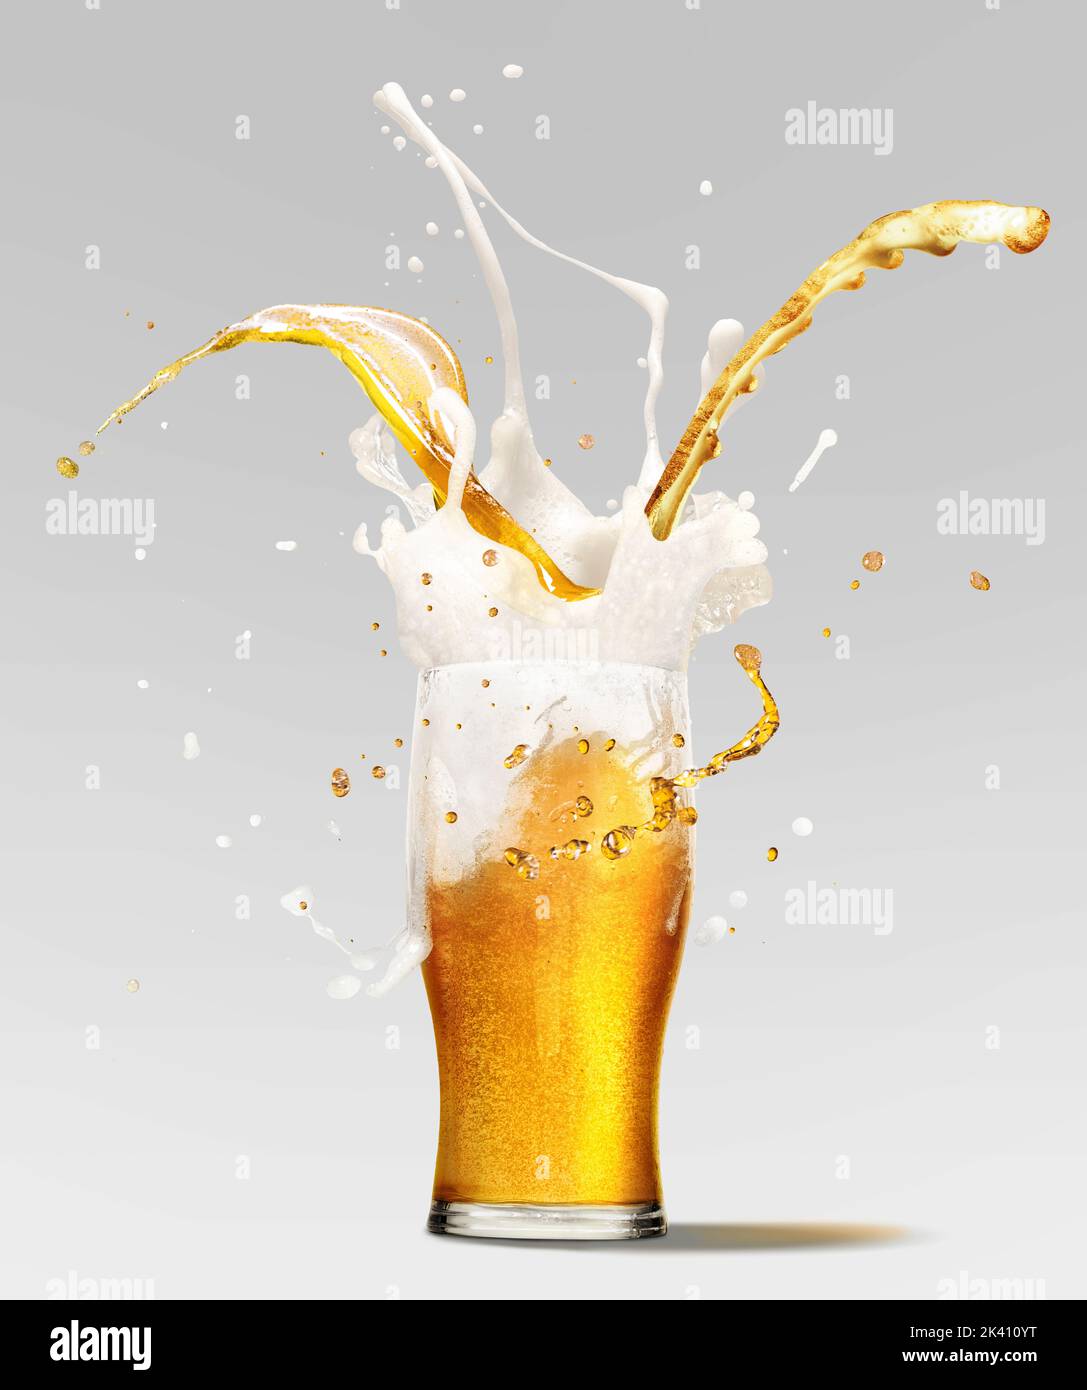 Foam splashes from full glass of frothy light lager beer isolated over light background. Concept of alcohol, oktoberfest, drinks, holidays and Stock Photo